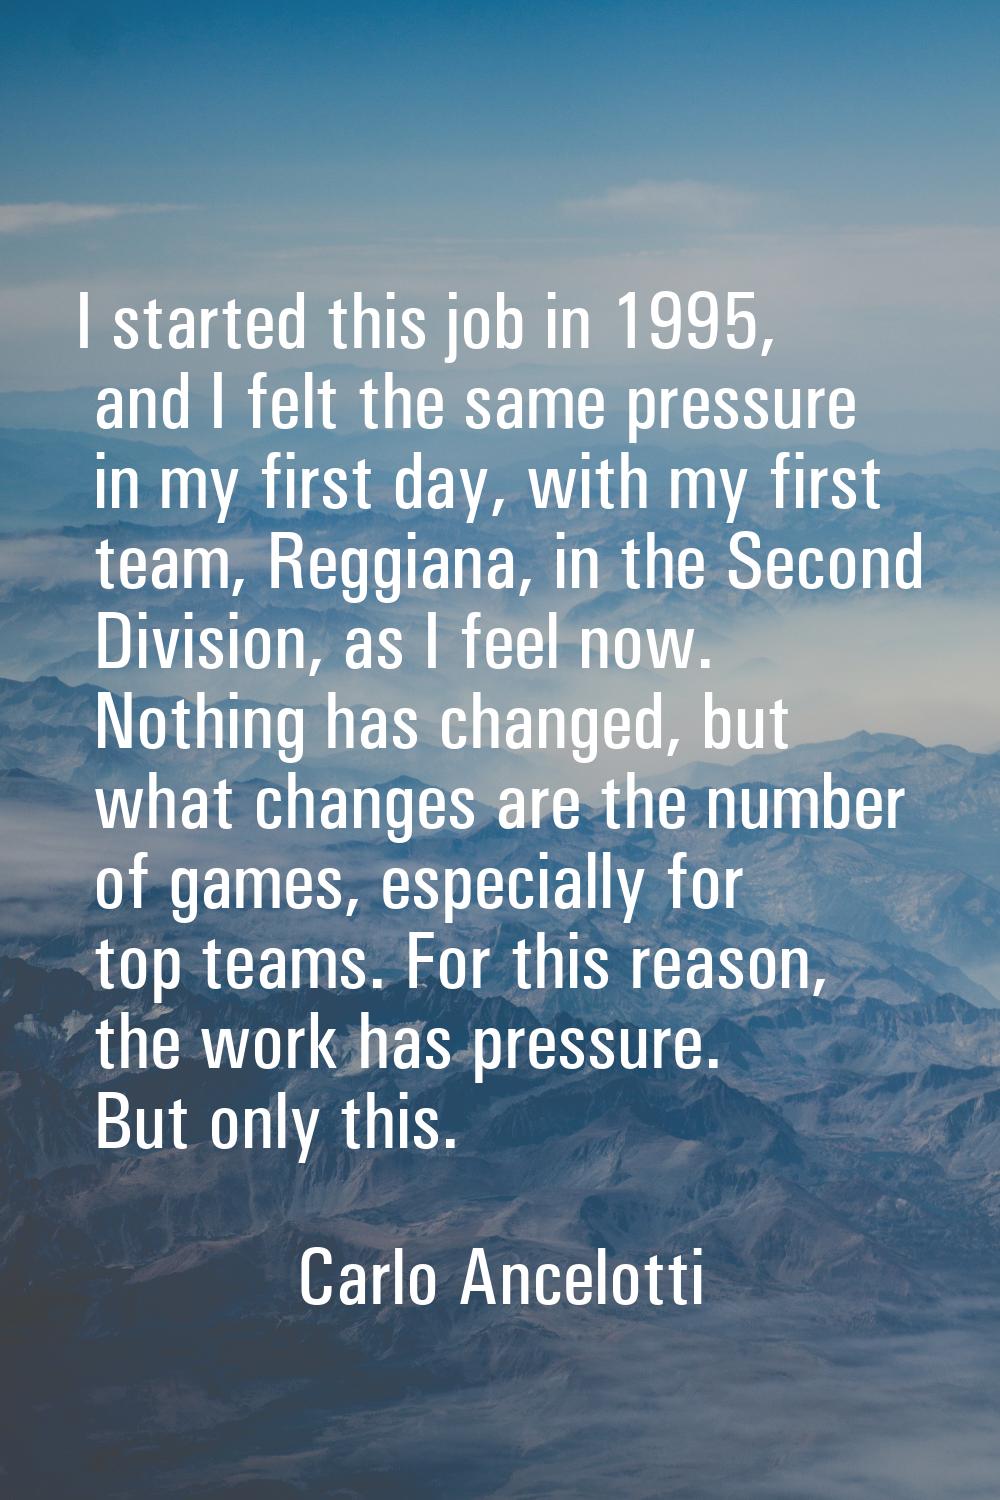 I started this job in 1995, and I felt the same pressure in my first day, with my first team, Reggi